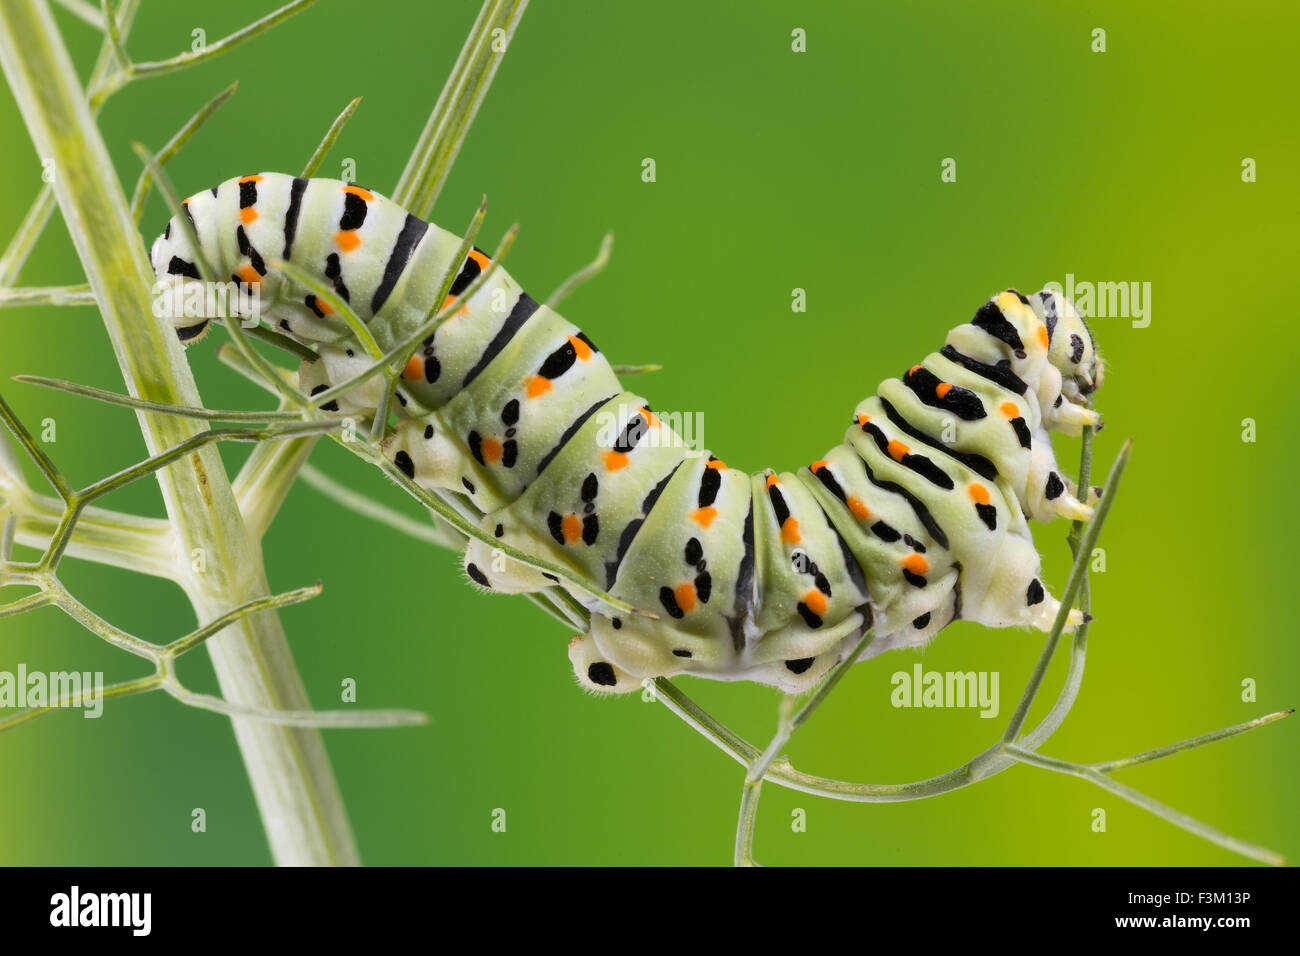 Caterpillar of the Maltese Swallowtail Butterfly eating fennel leaves, 10 days after hatching, about 40 mm long. Stock Photo